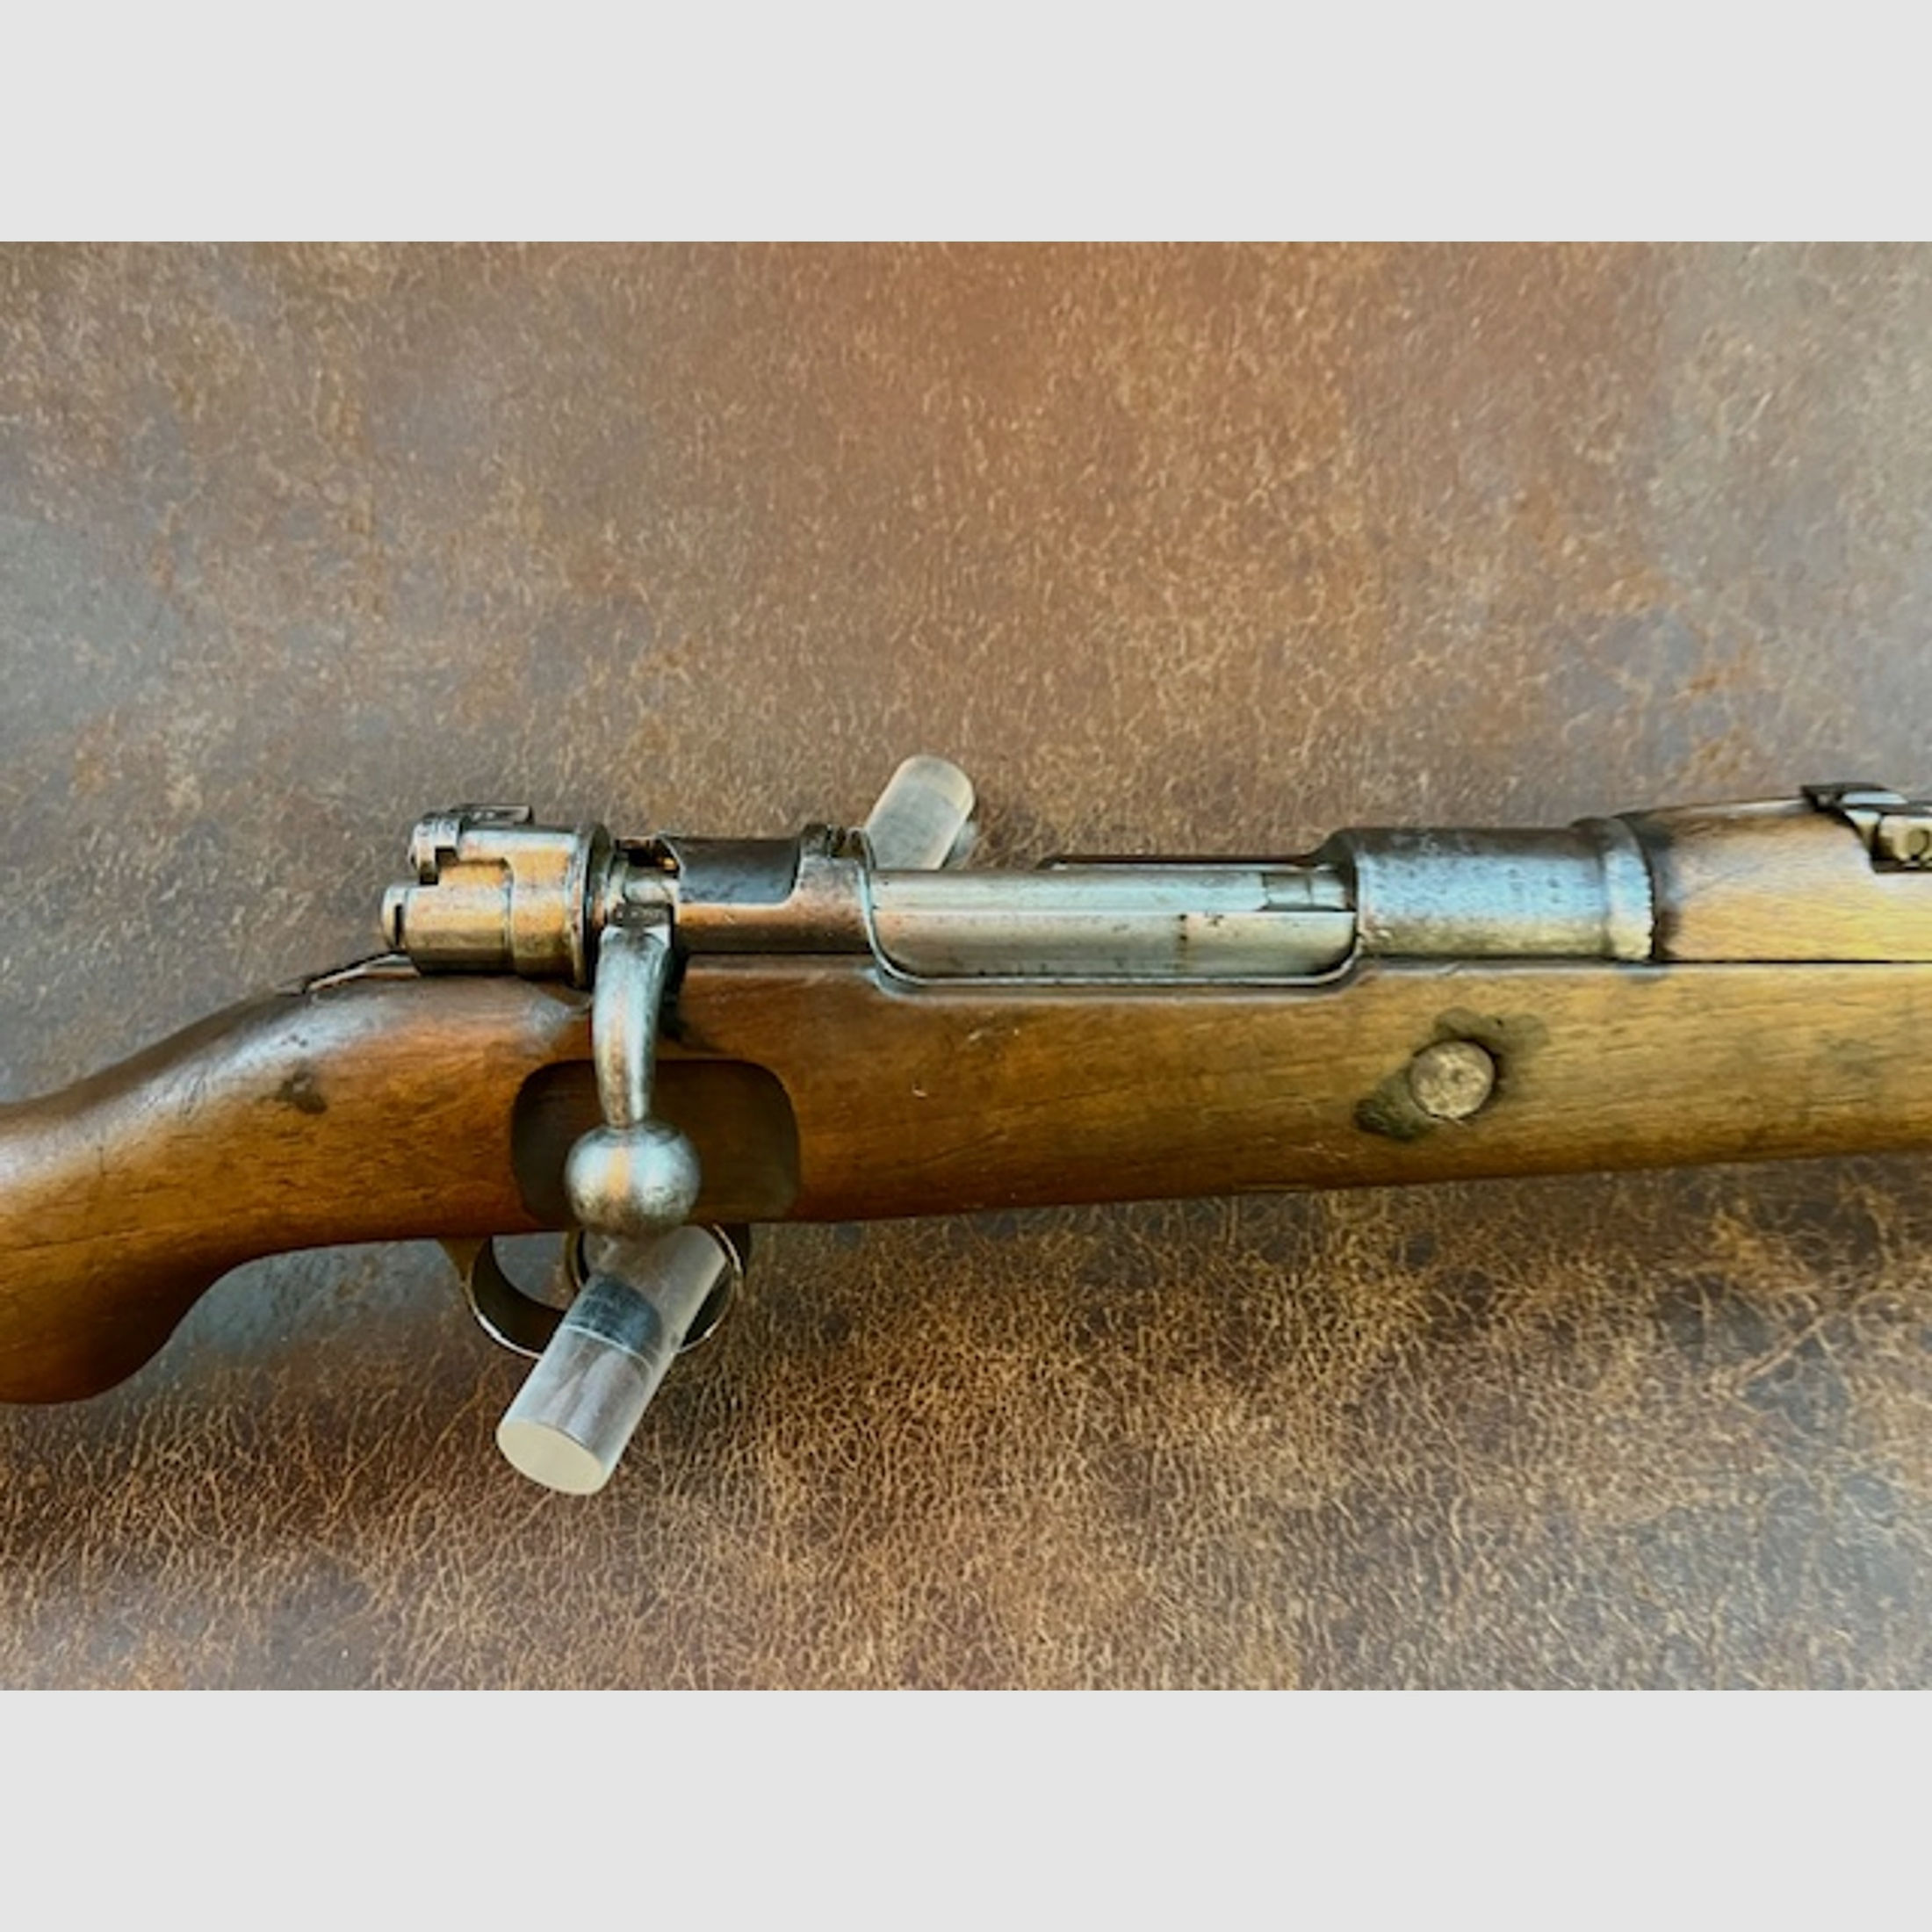 Mauser Repetierbuechse Mod. 1916 cal. 8x57IS